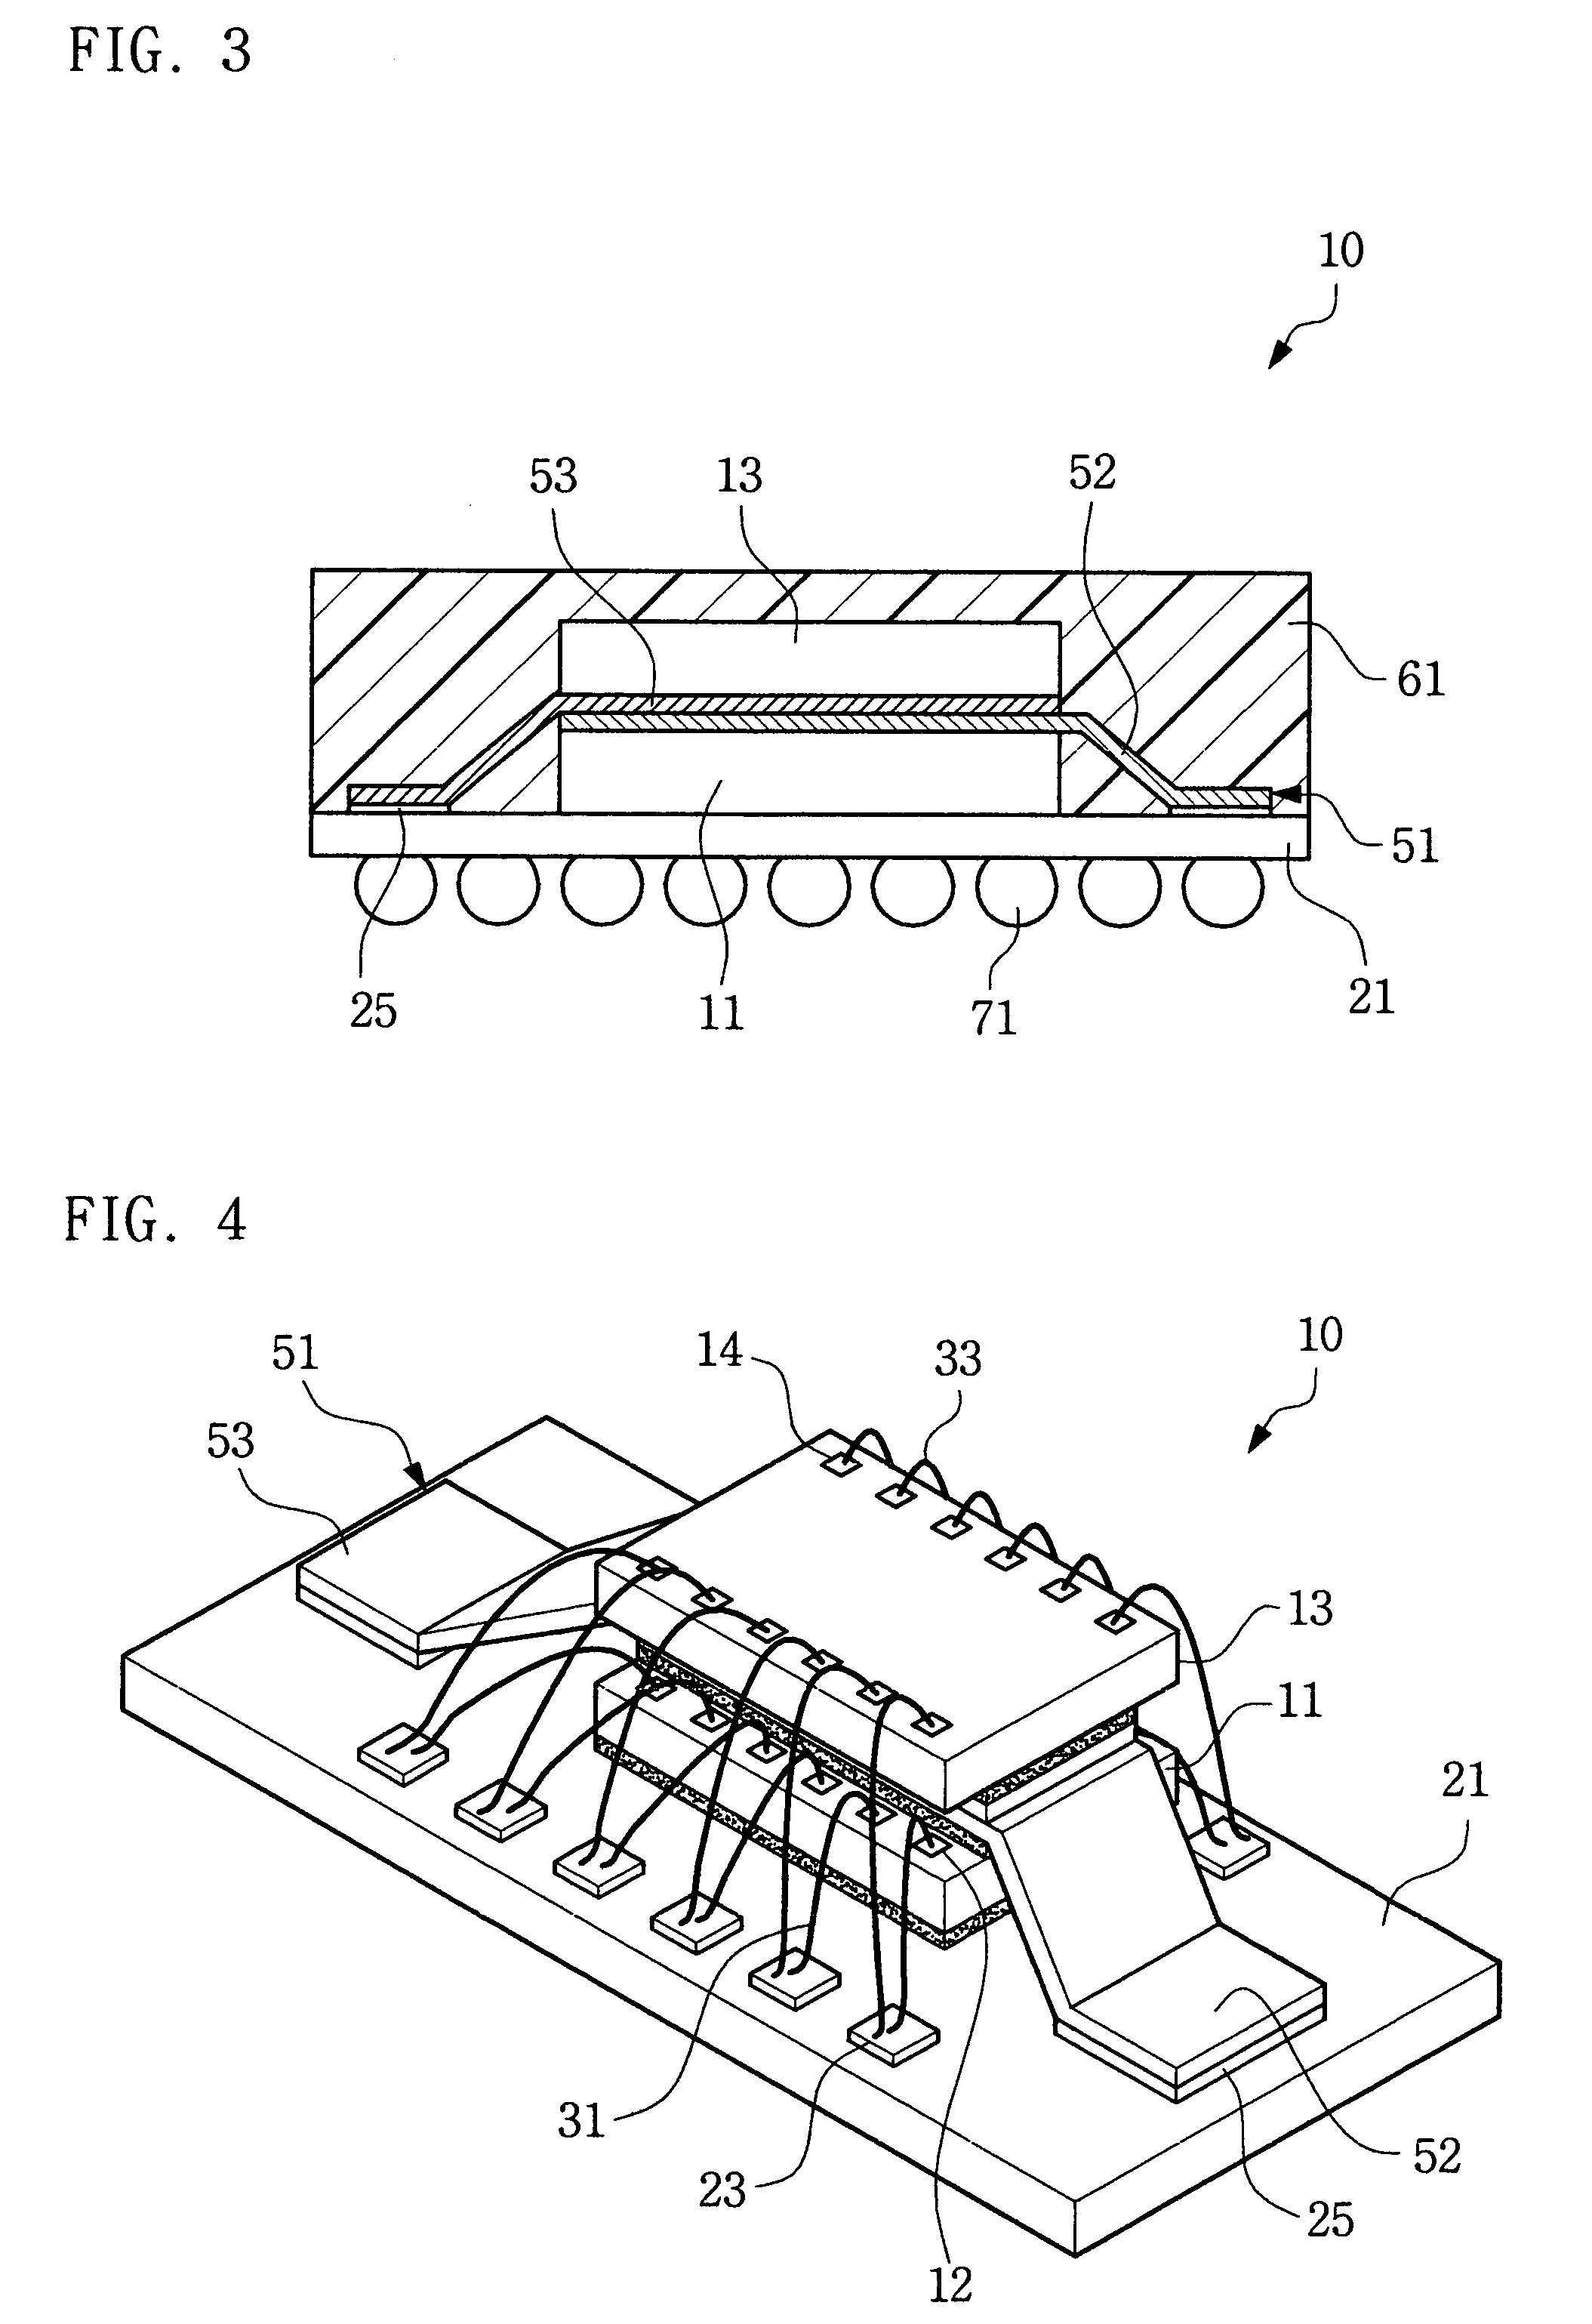 Semiconductor chip package with thermoelectric cooler